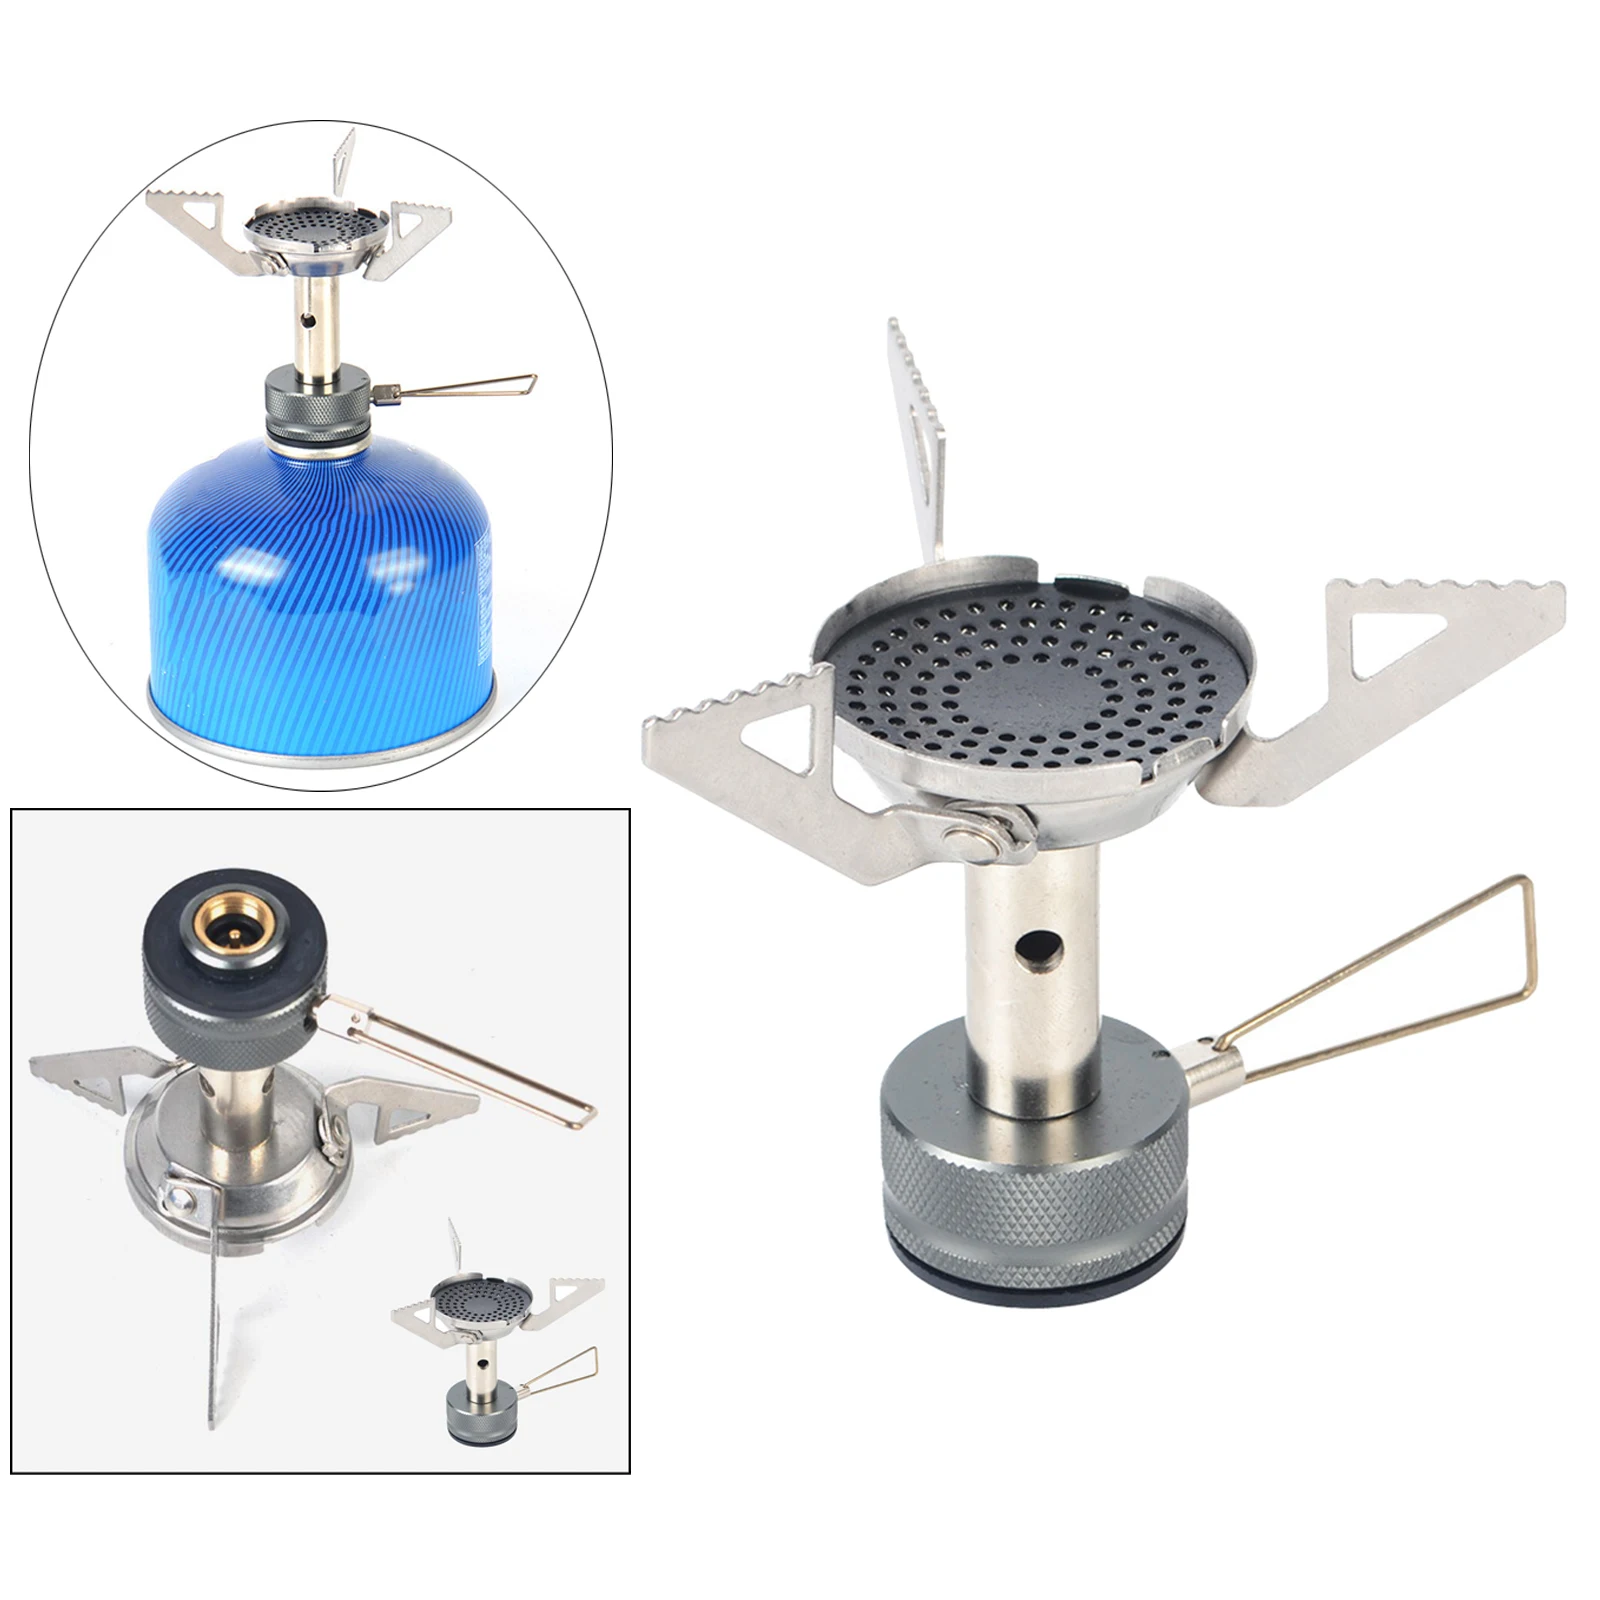 Mini Gas Stove Backpacking Canister Stove Burners Camping Outdoor Stove Cooking Foldable Hiking Butane Propane Furnace Gear